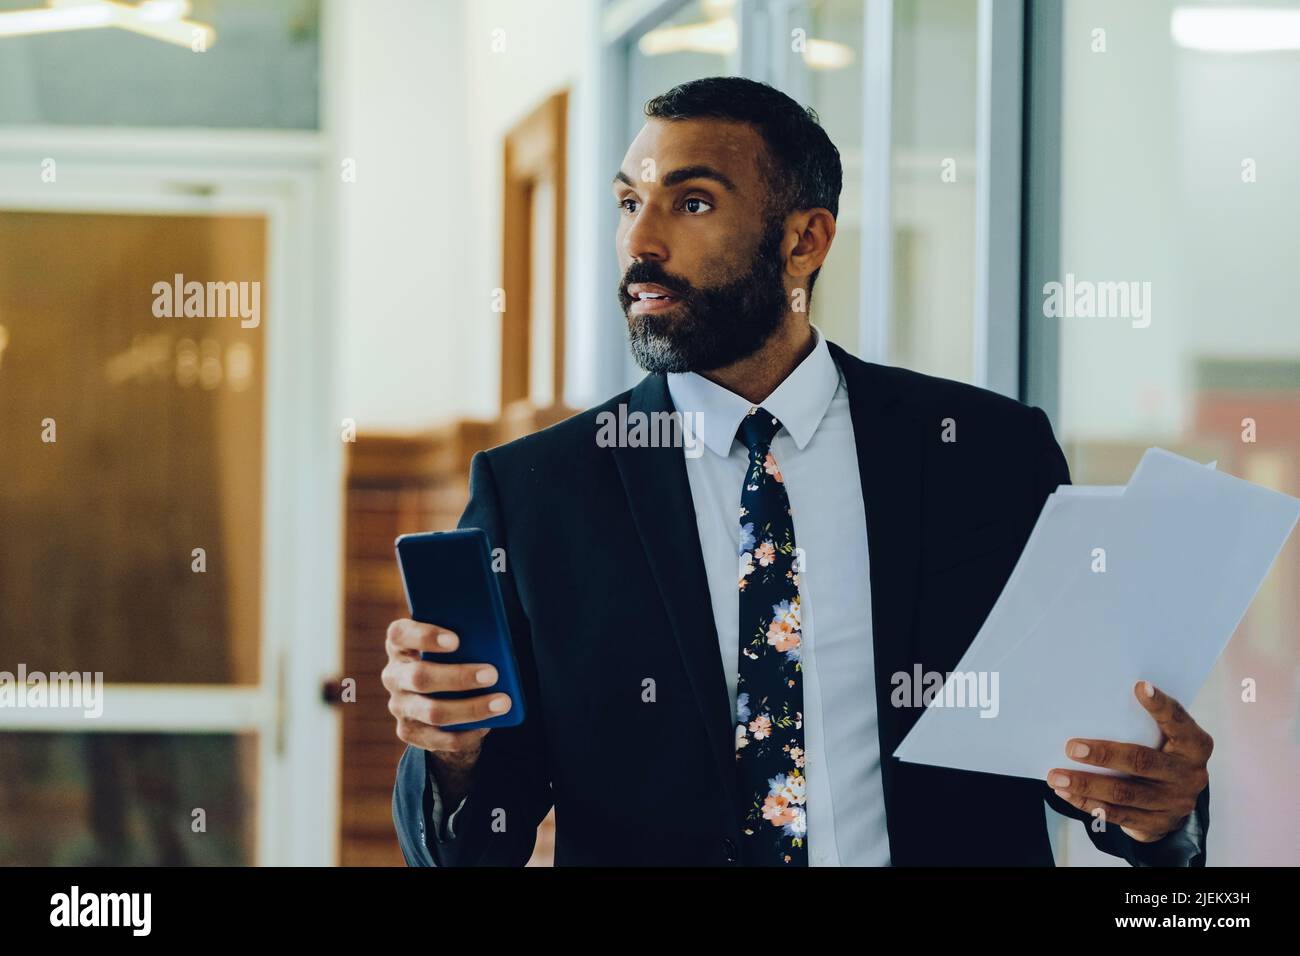 Mid adult bearded black man Entrepreneur Businessman wearing suit holding papers and smartphone walking in office shot Stock Photo